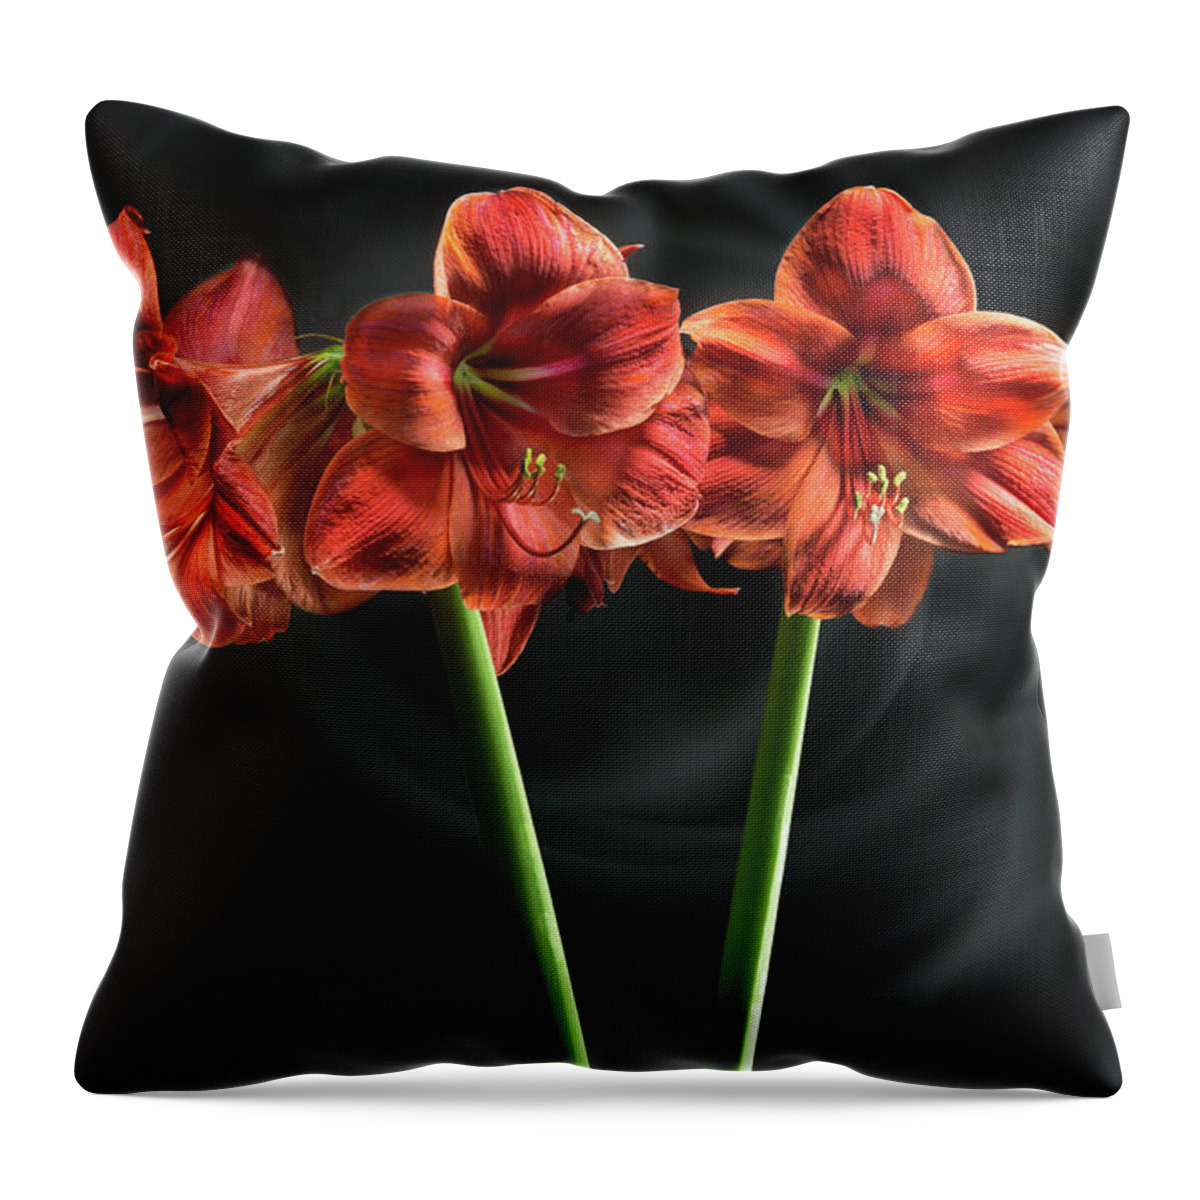 Light Painting Throw Pillow featuring the photograph Amarilis by Niels Nielsen